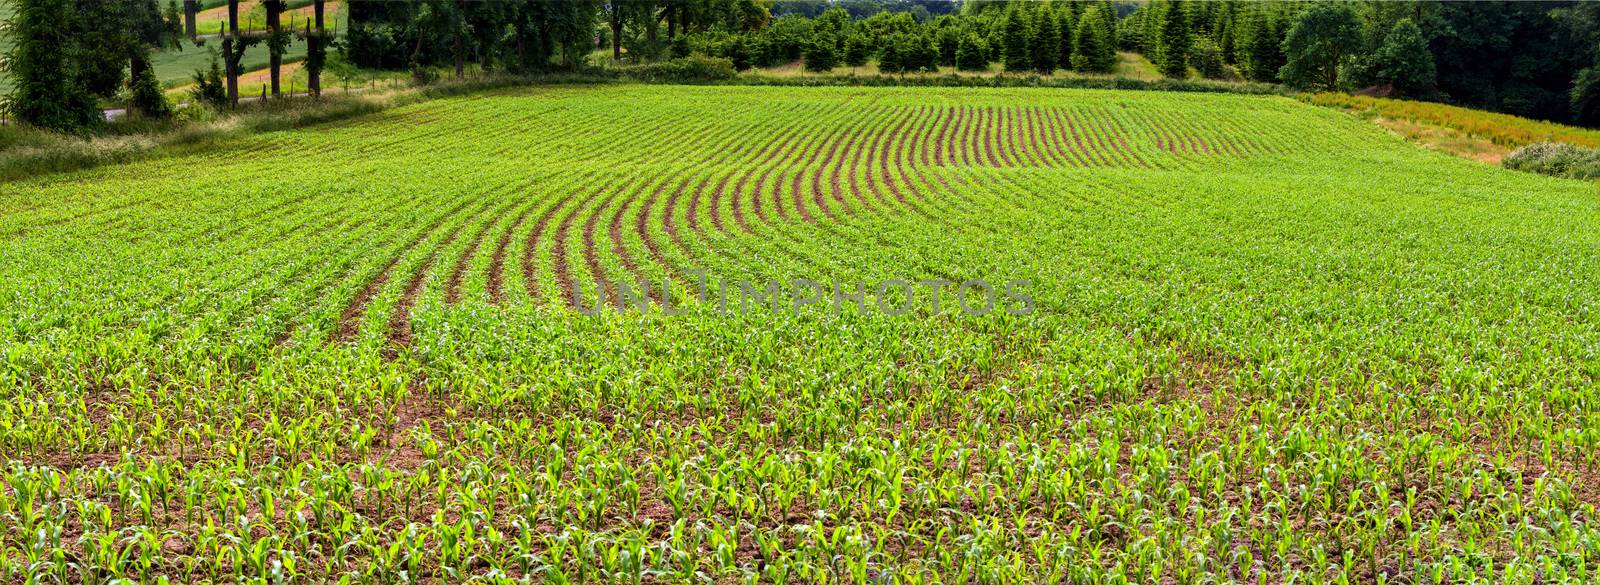 Panoramic view, rows of corn seedlings on a field